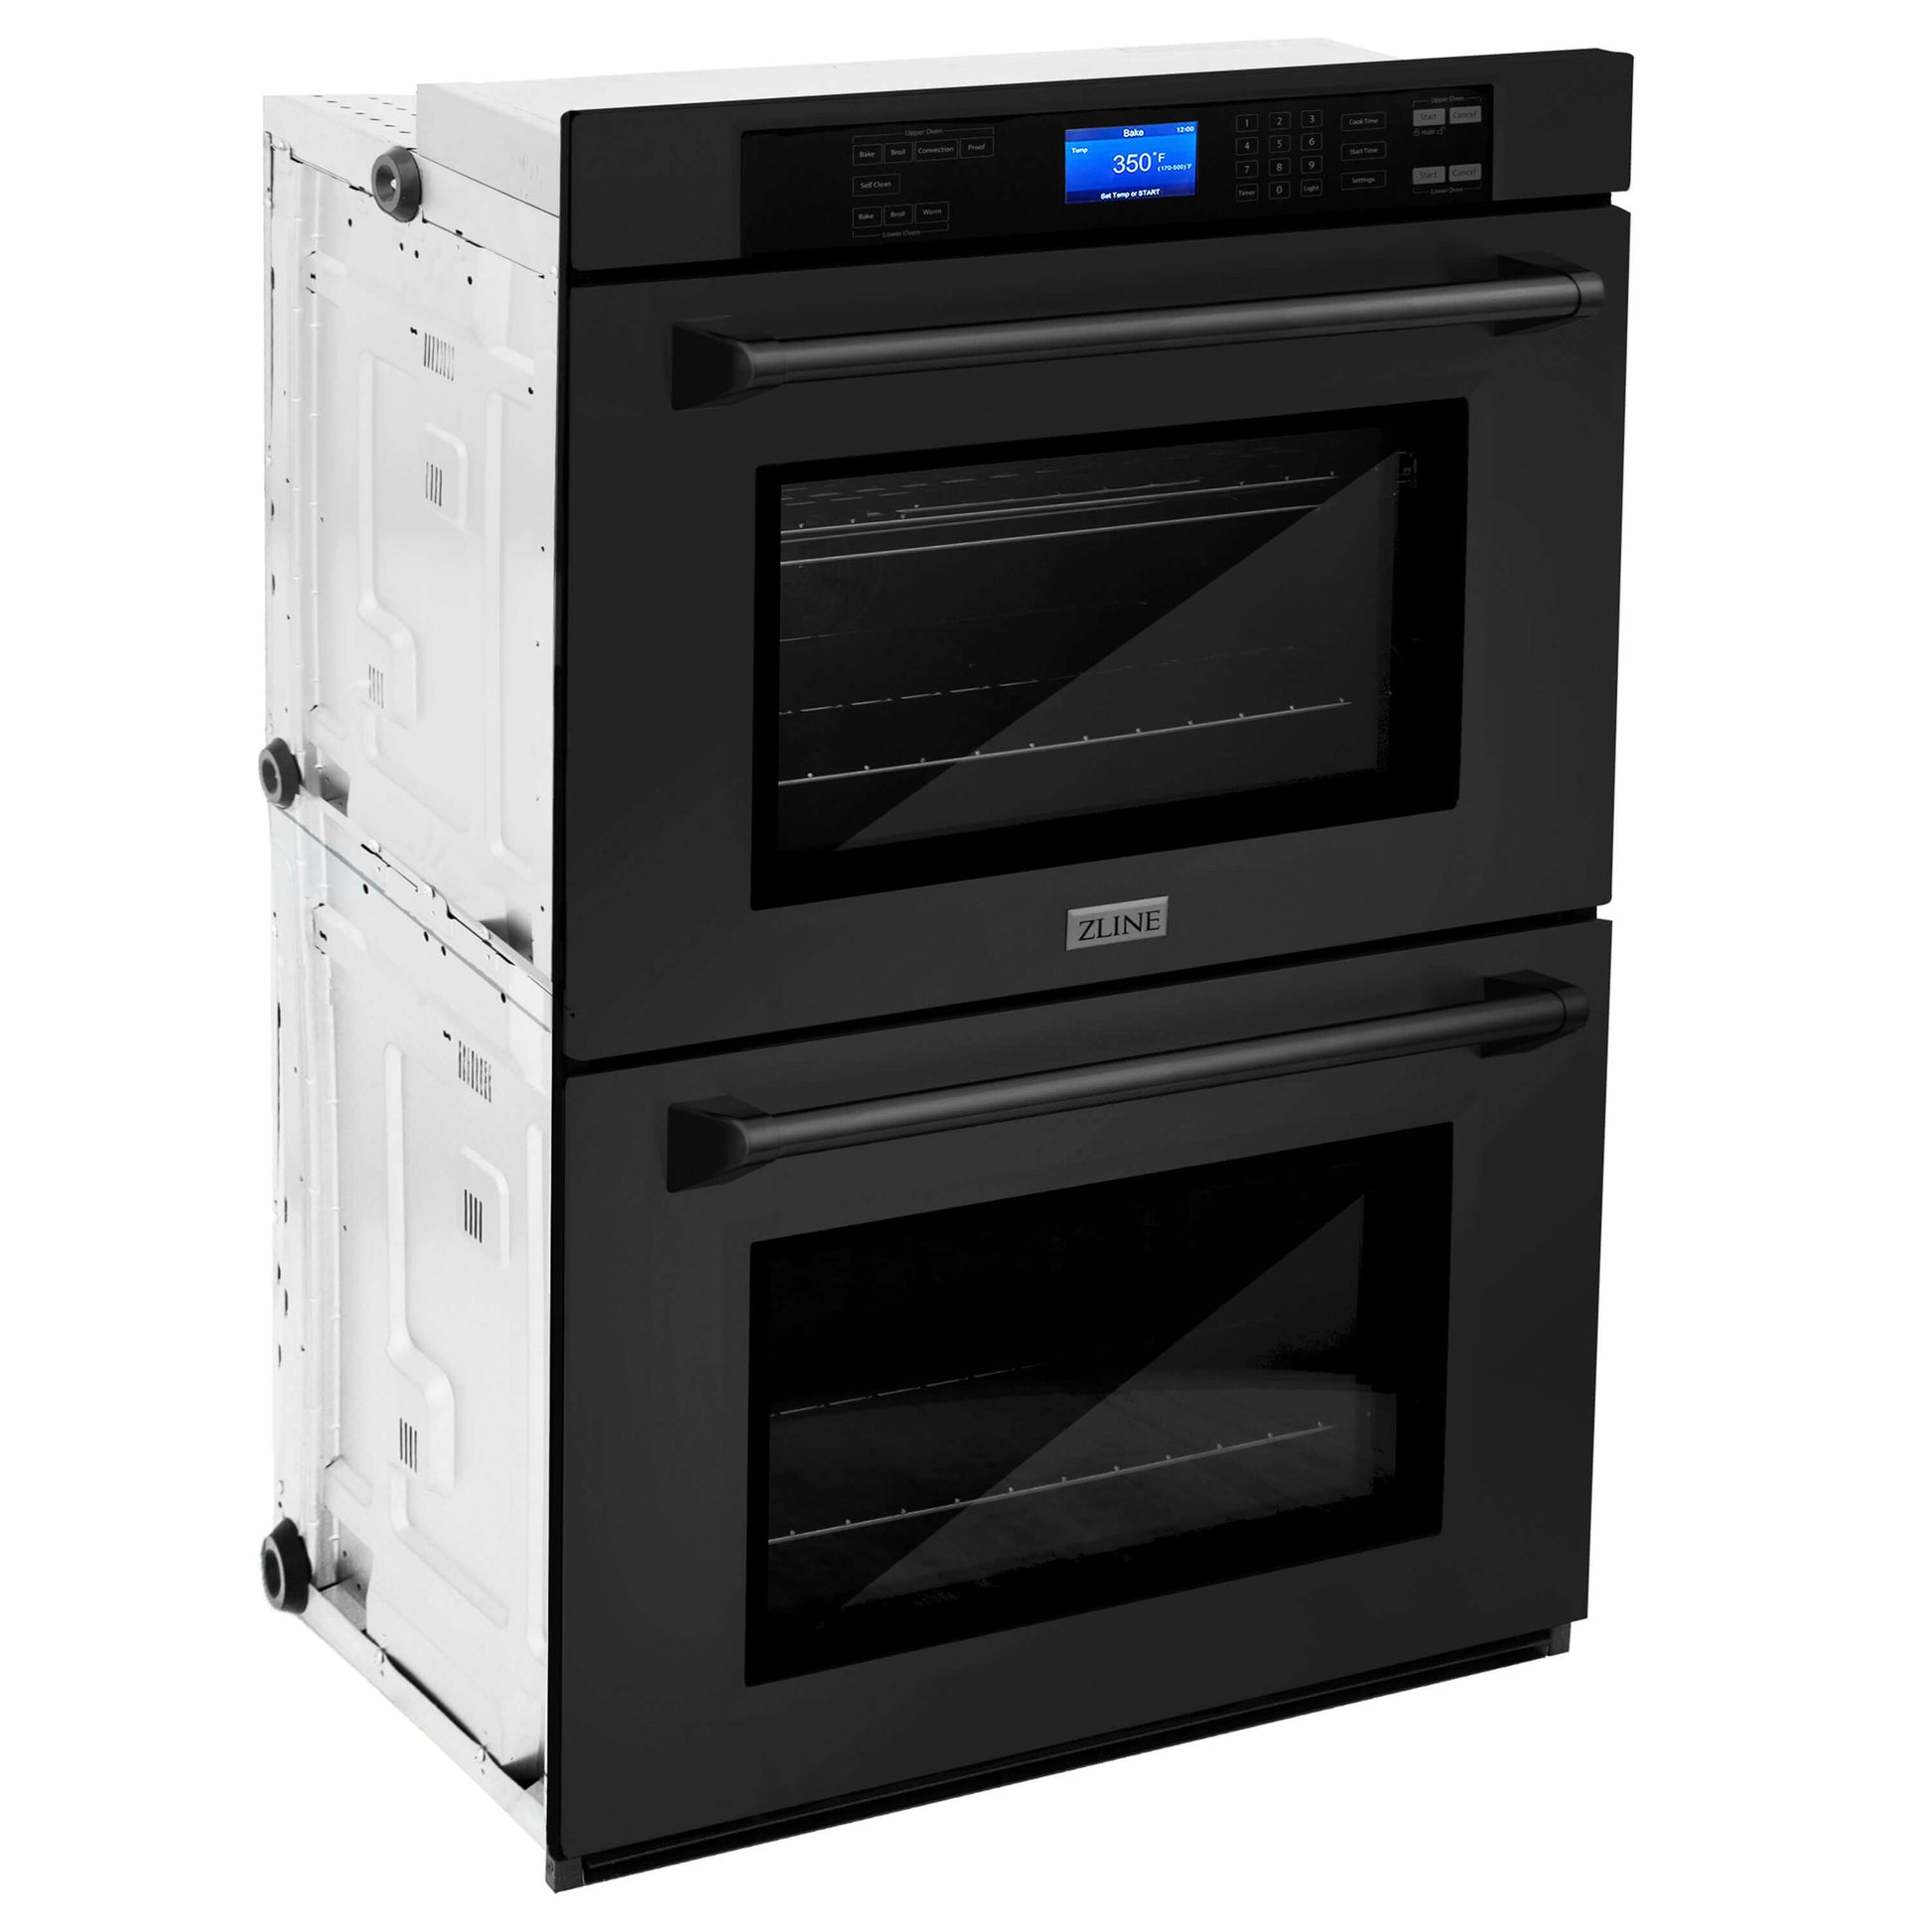 ZLINE 30 in. Professional Electric Double Wall Oven with Self Clean and True Convection in Black Stainless Steel (AWD-30-BS) side, closed.